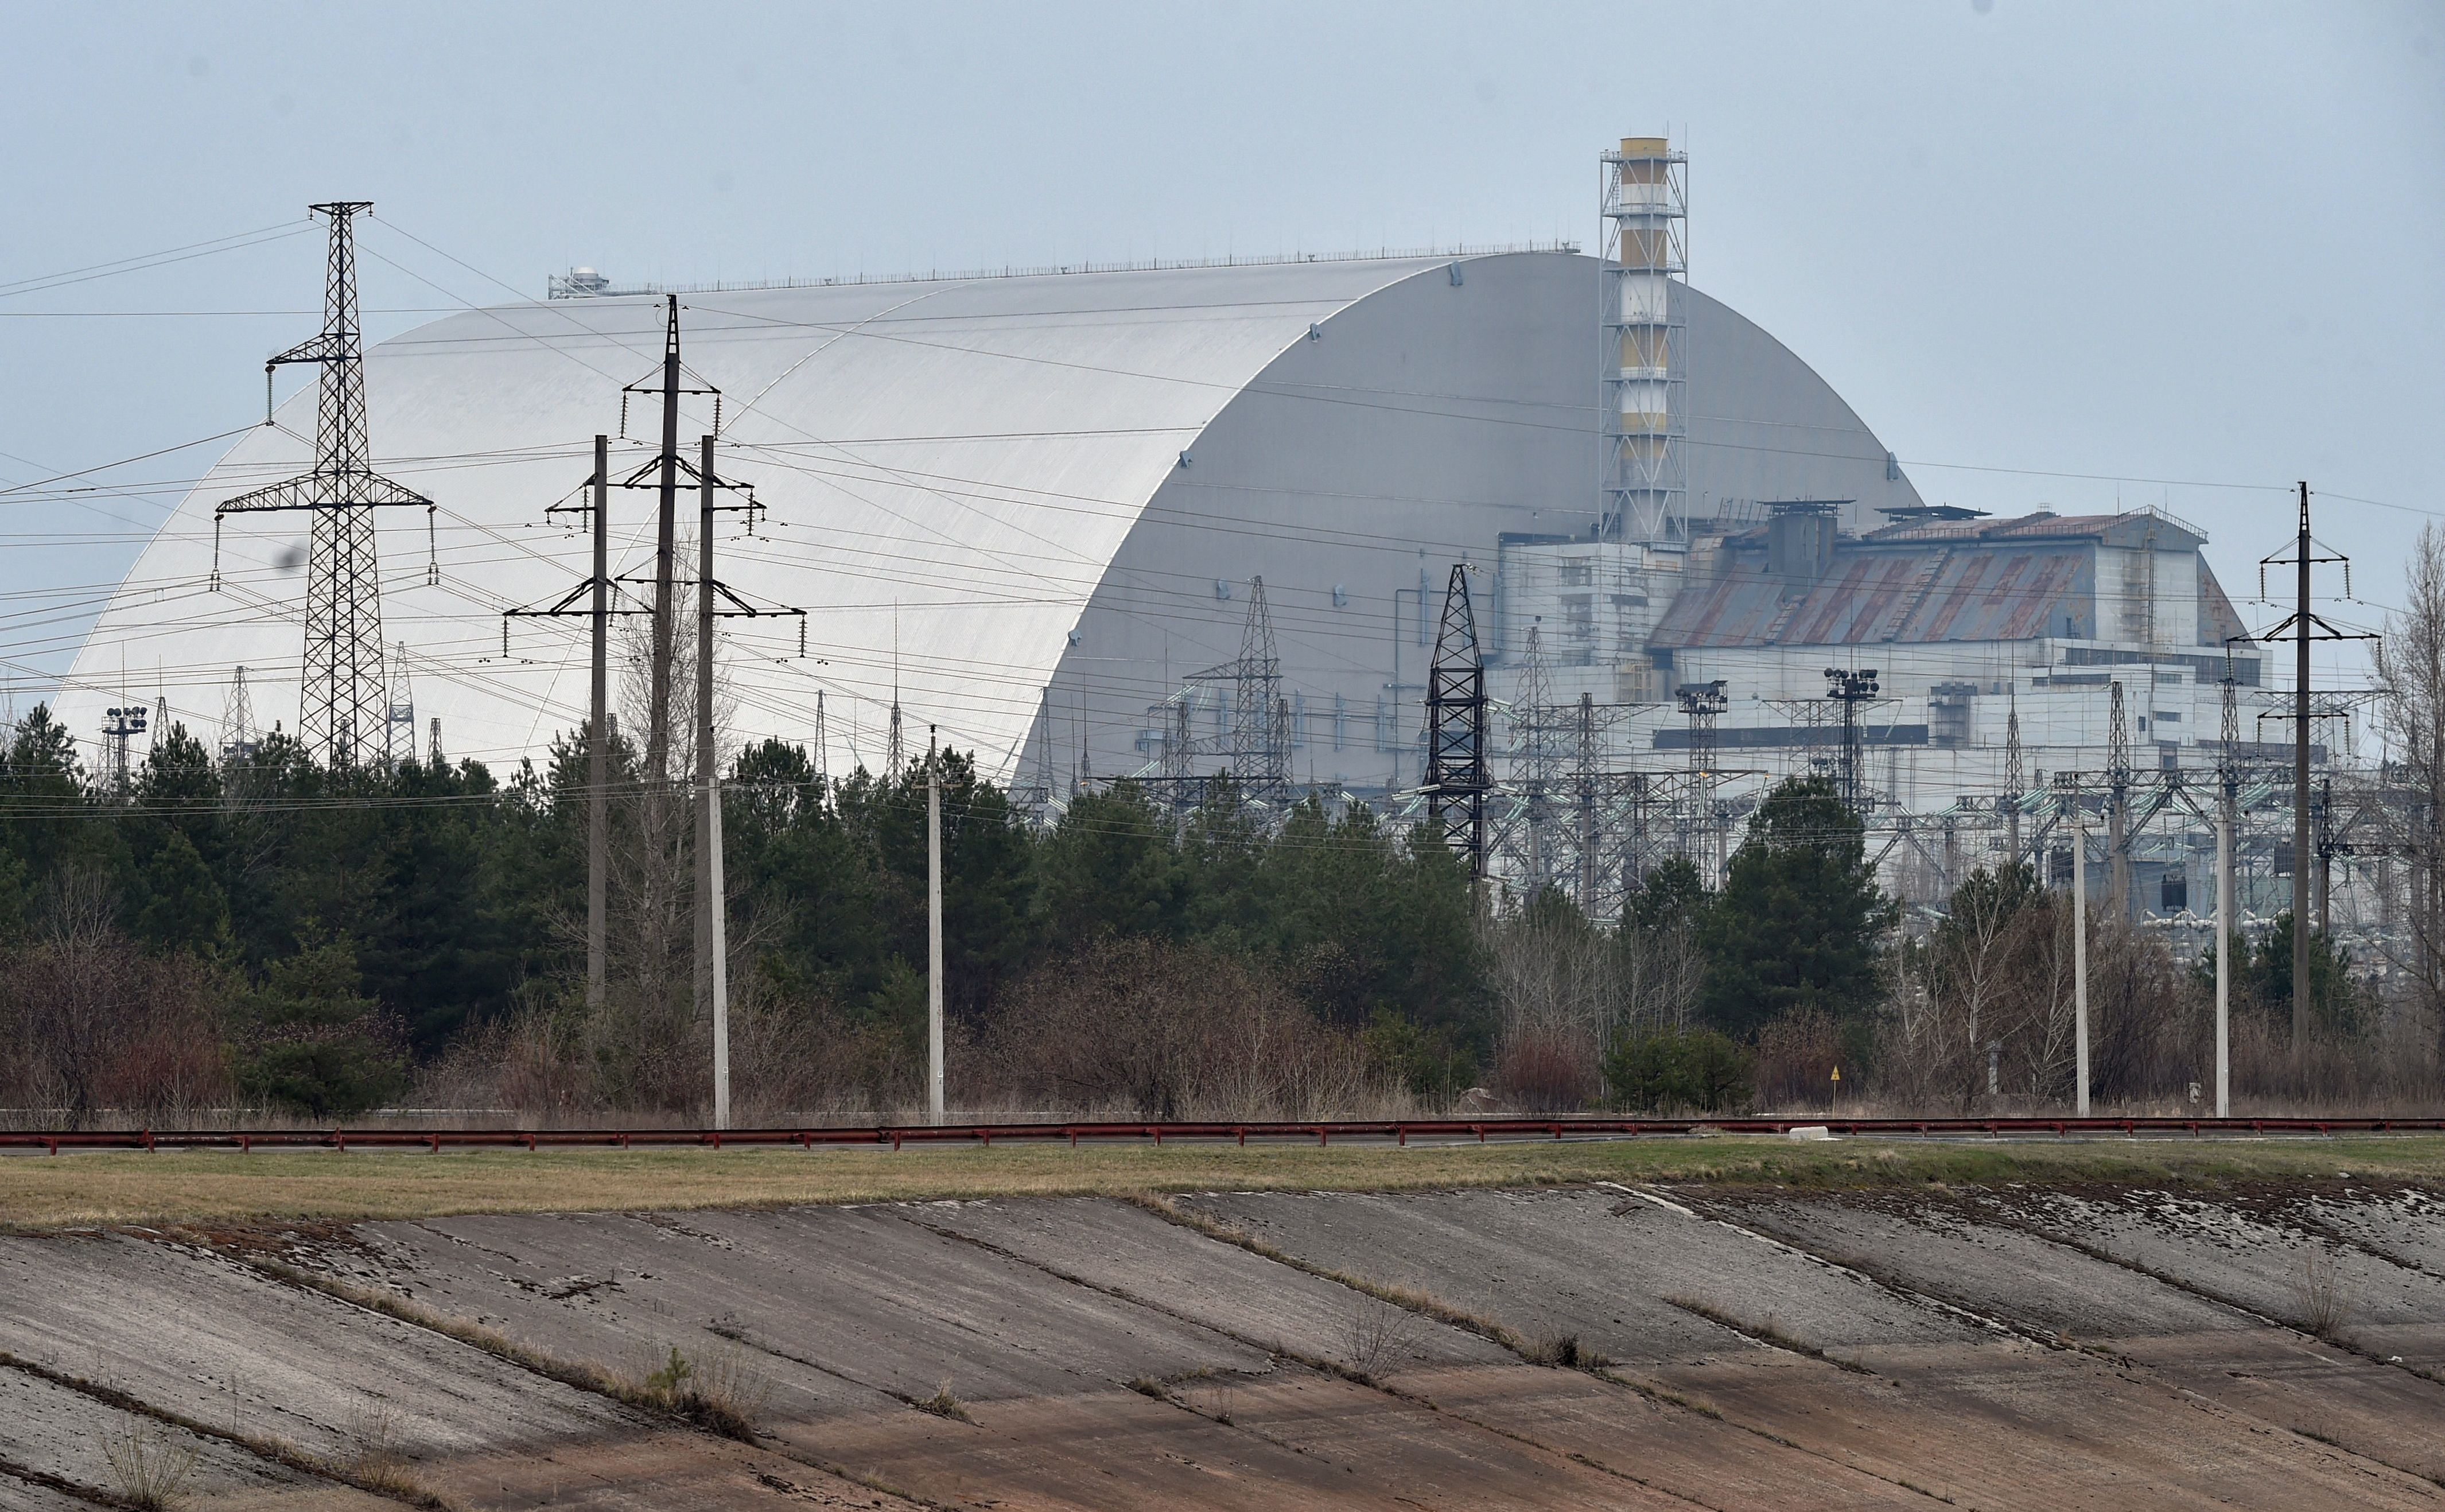 The Chernobyl nuclear power plant